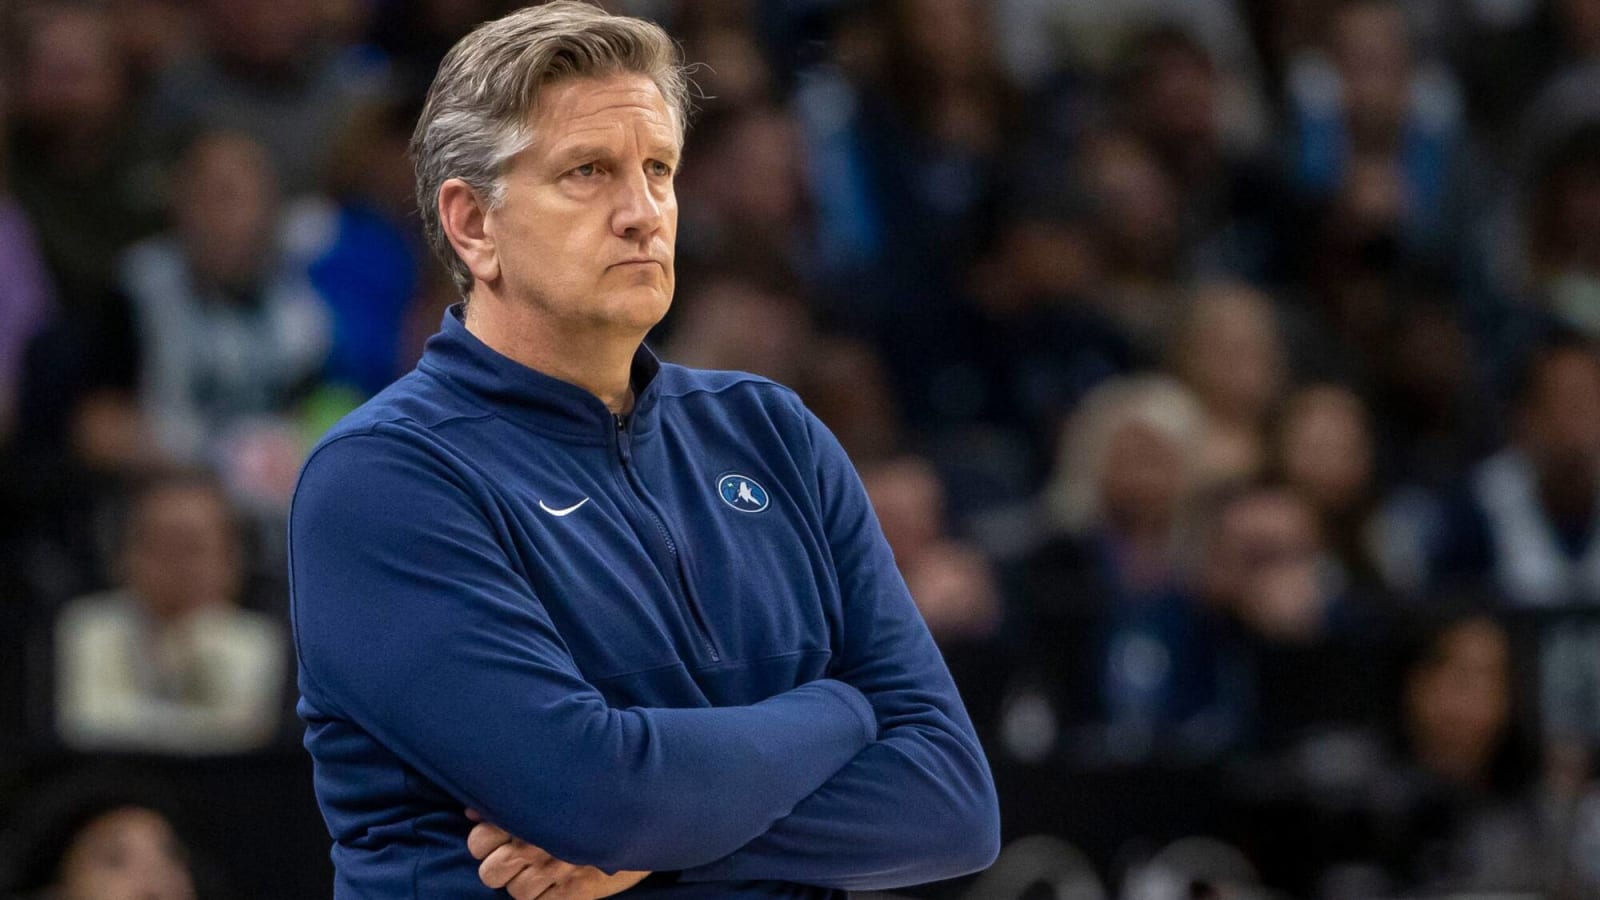 Chris Finch Created Timberwolves Gm 2 Defense Specifically to Beat Nuggets… Then Hid it All Year